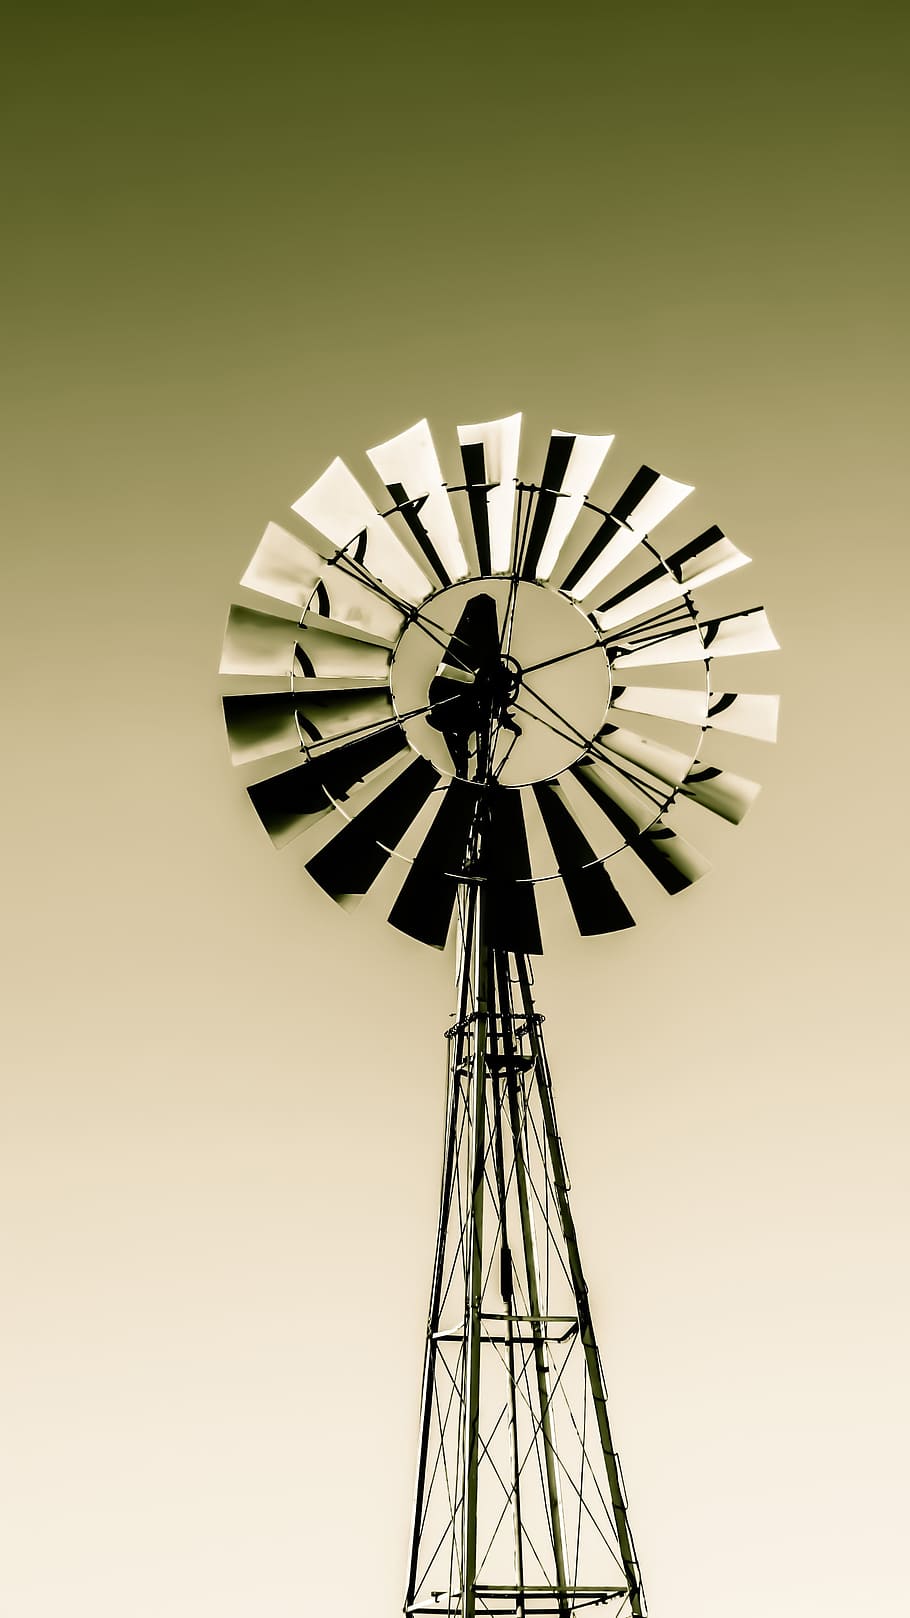 Windmill, Wind, Traditional, Water, fuel and power generation, environmental conservation, wind power, alternative energy, wind turbine, turbine